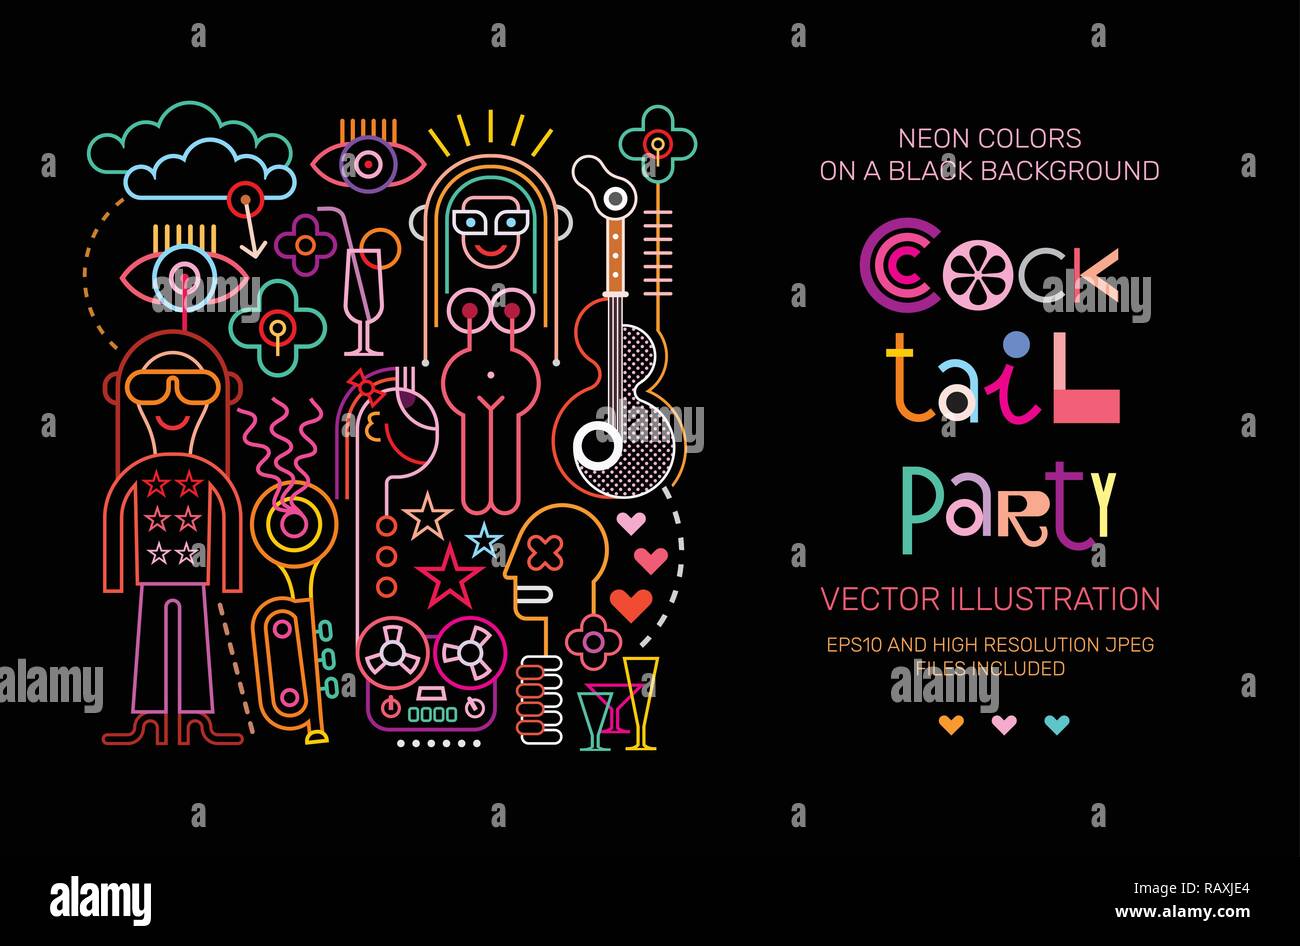 Vibrant colors on a black background Cocktail Party vector poster template design. Stock Vector